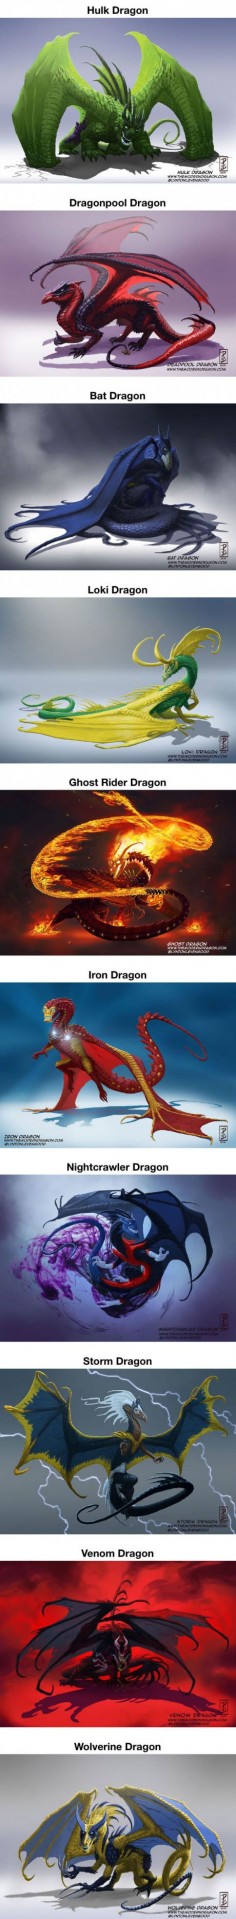 Re-Imagined Popular Comic Characters As Dragons